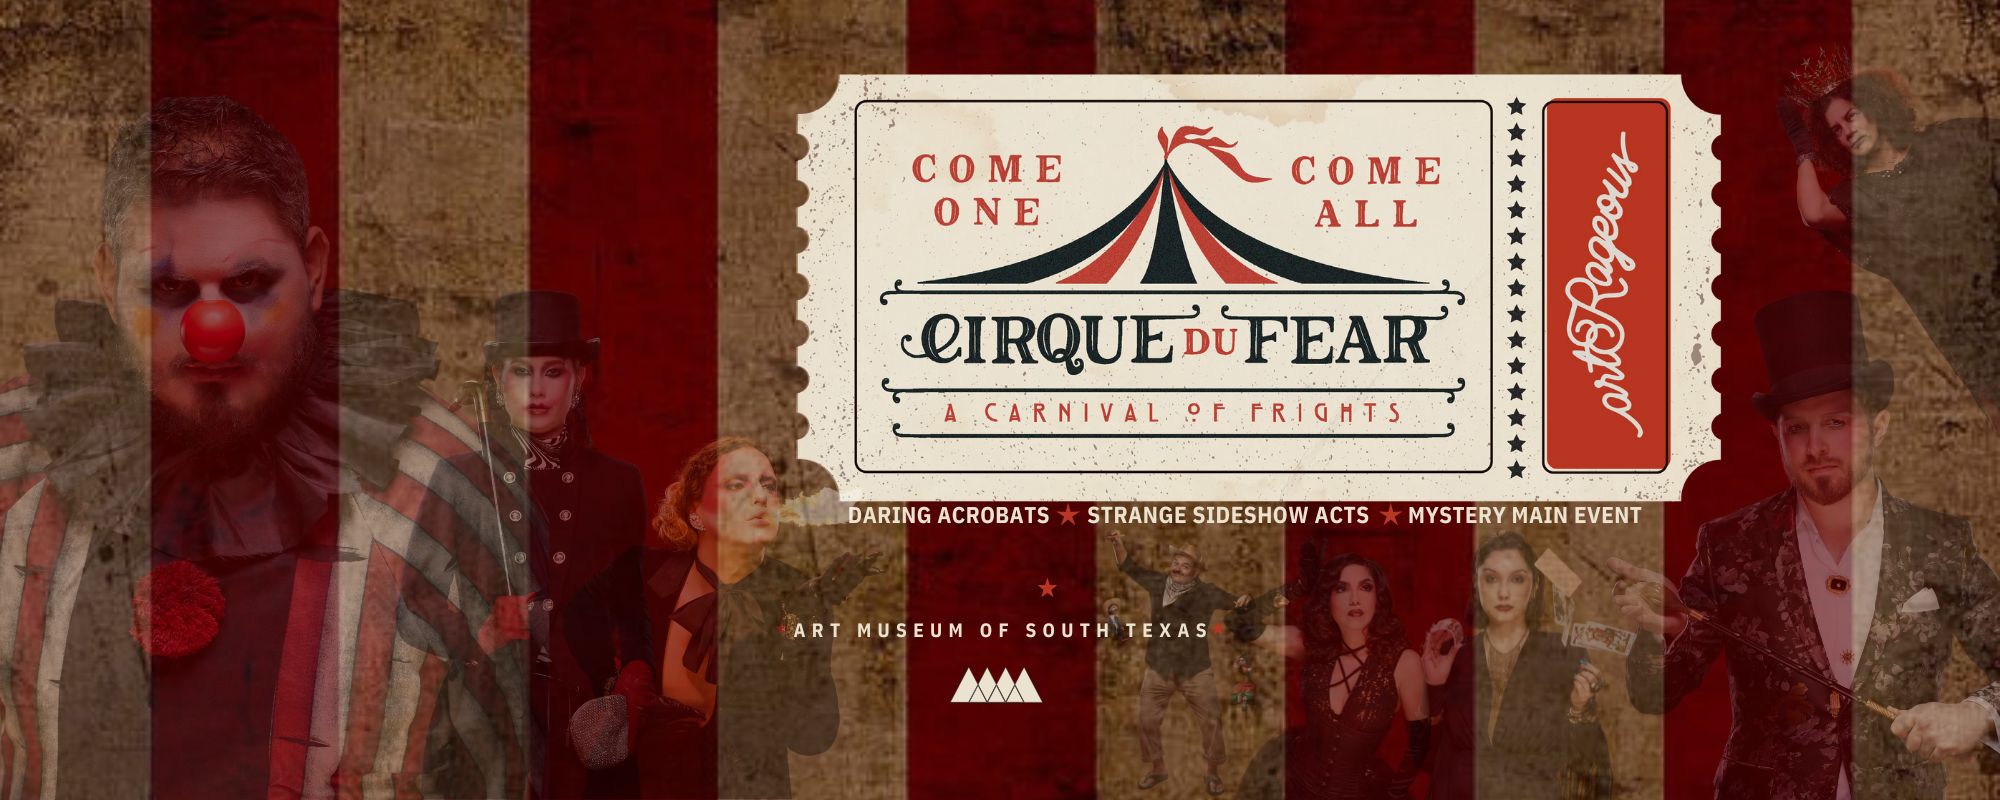 menacing circus performers gather around a circus ticket which reads "come one, come all, to artRageous cirque du fear" Presented by the Art Museum of South Texas. Daring acrobats, strange sideshow acts, mystery main event. June 8 2023